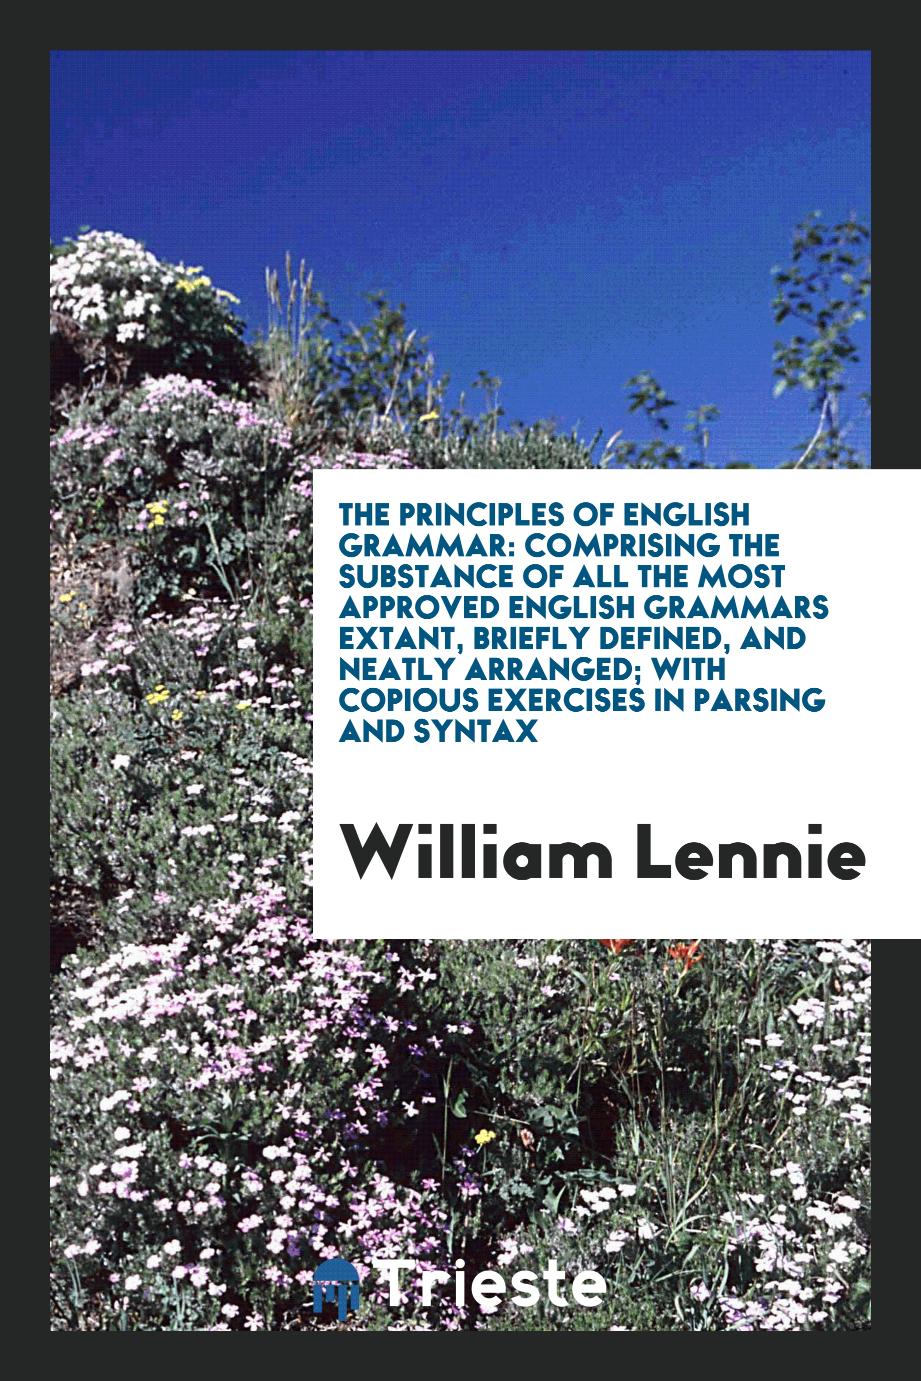 The principles of English grammar: comprising the substance of all the most approved English grammars extant, briefly defined, and neatly arranged; with copious exercises in parsing and syntax